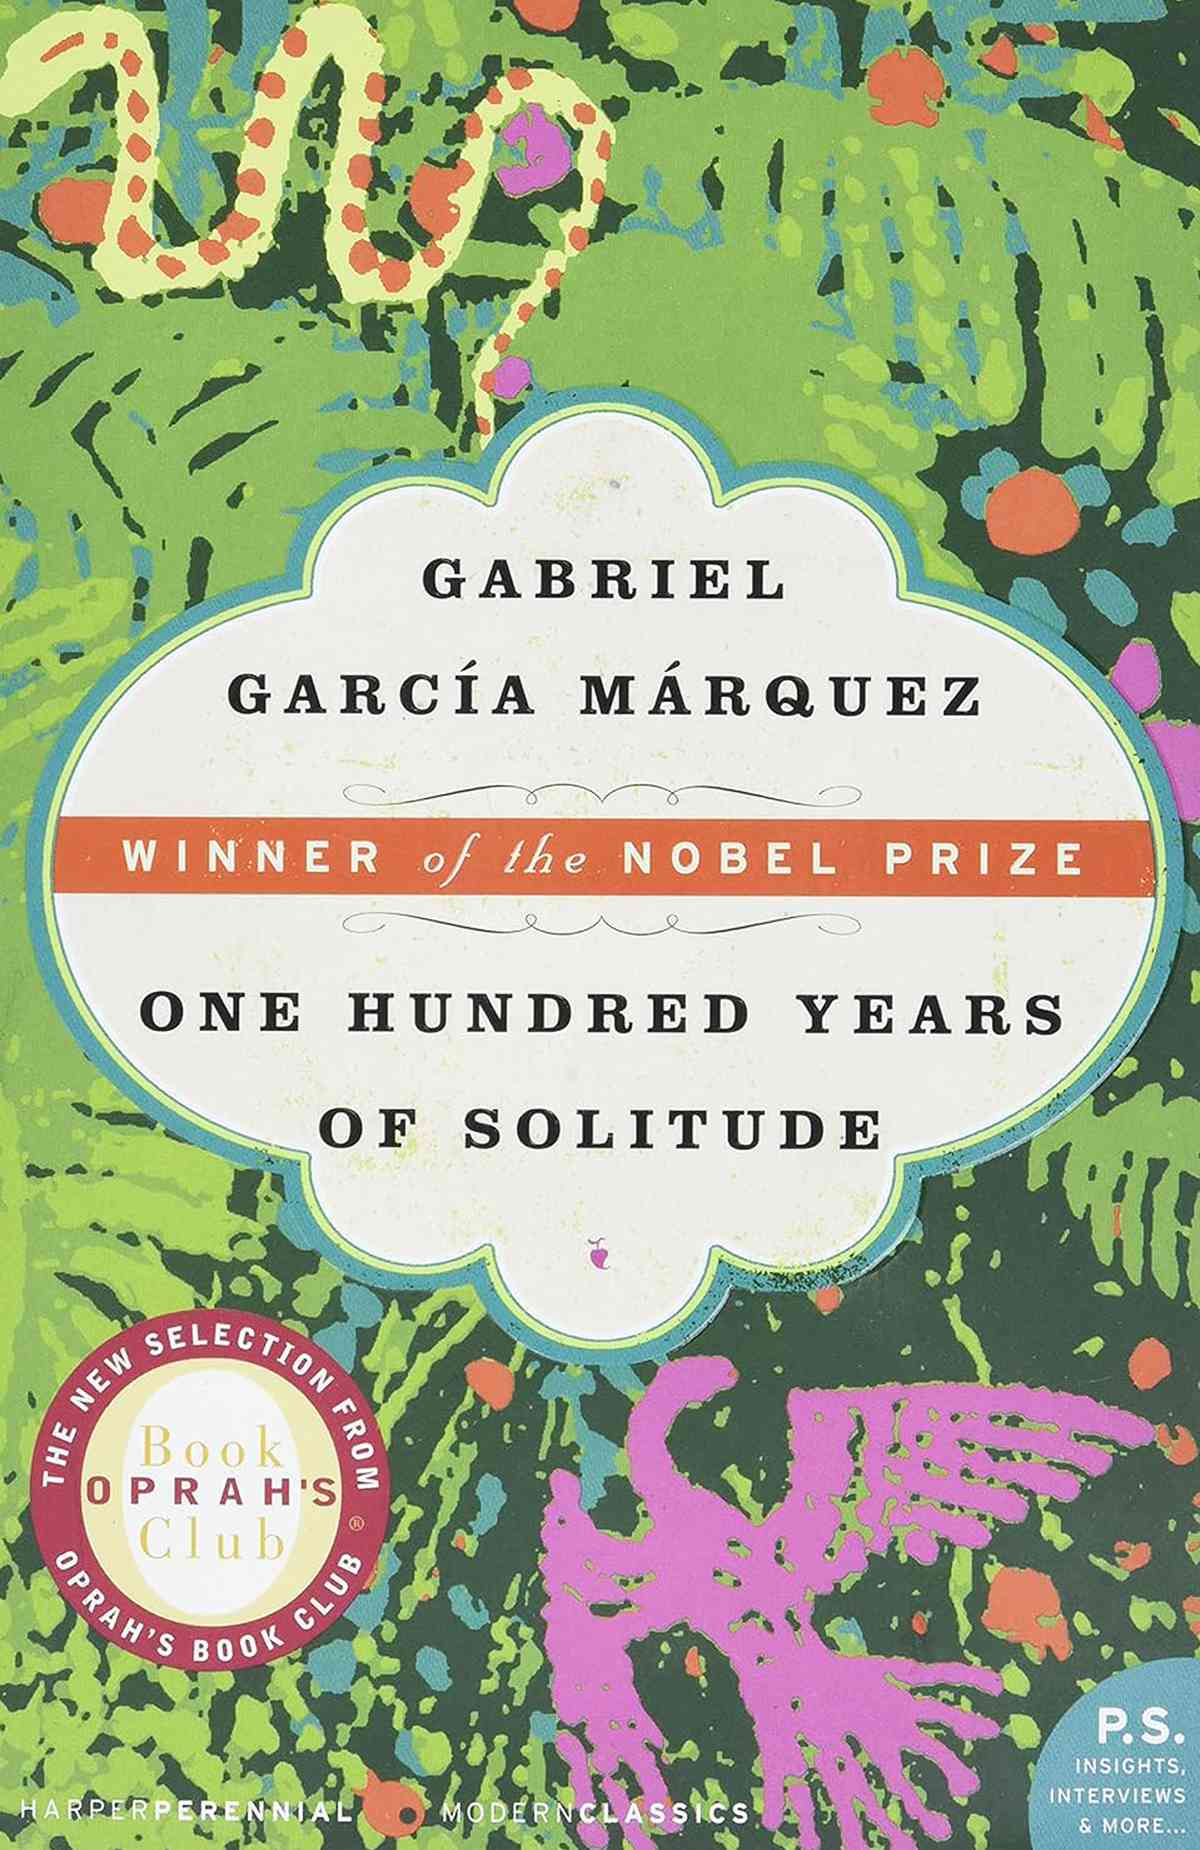 One Hundred Years of Solitude by Gabriel Garcia